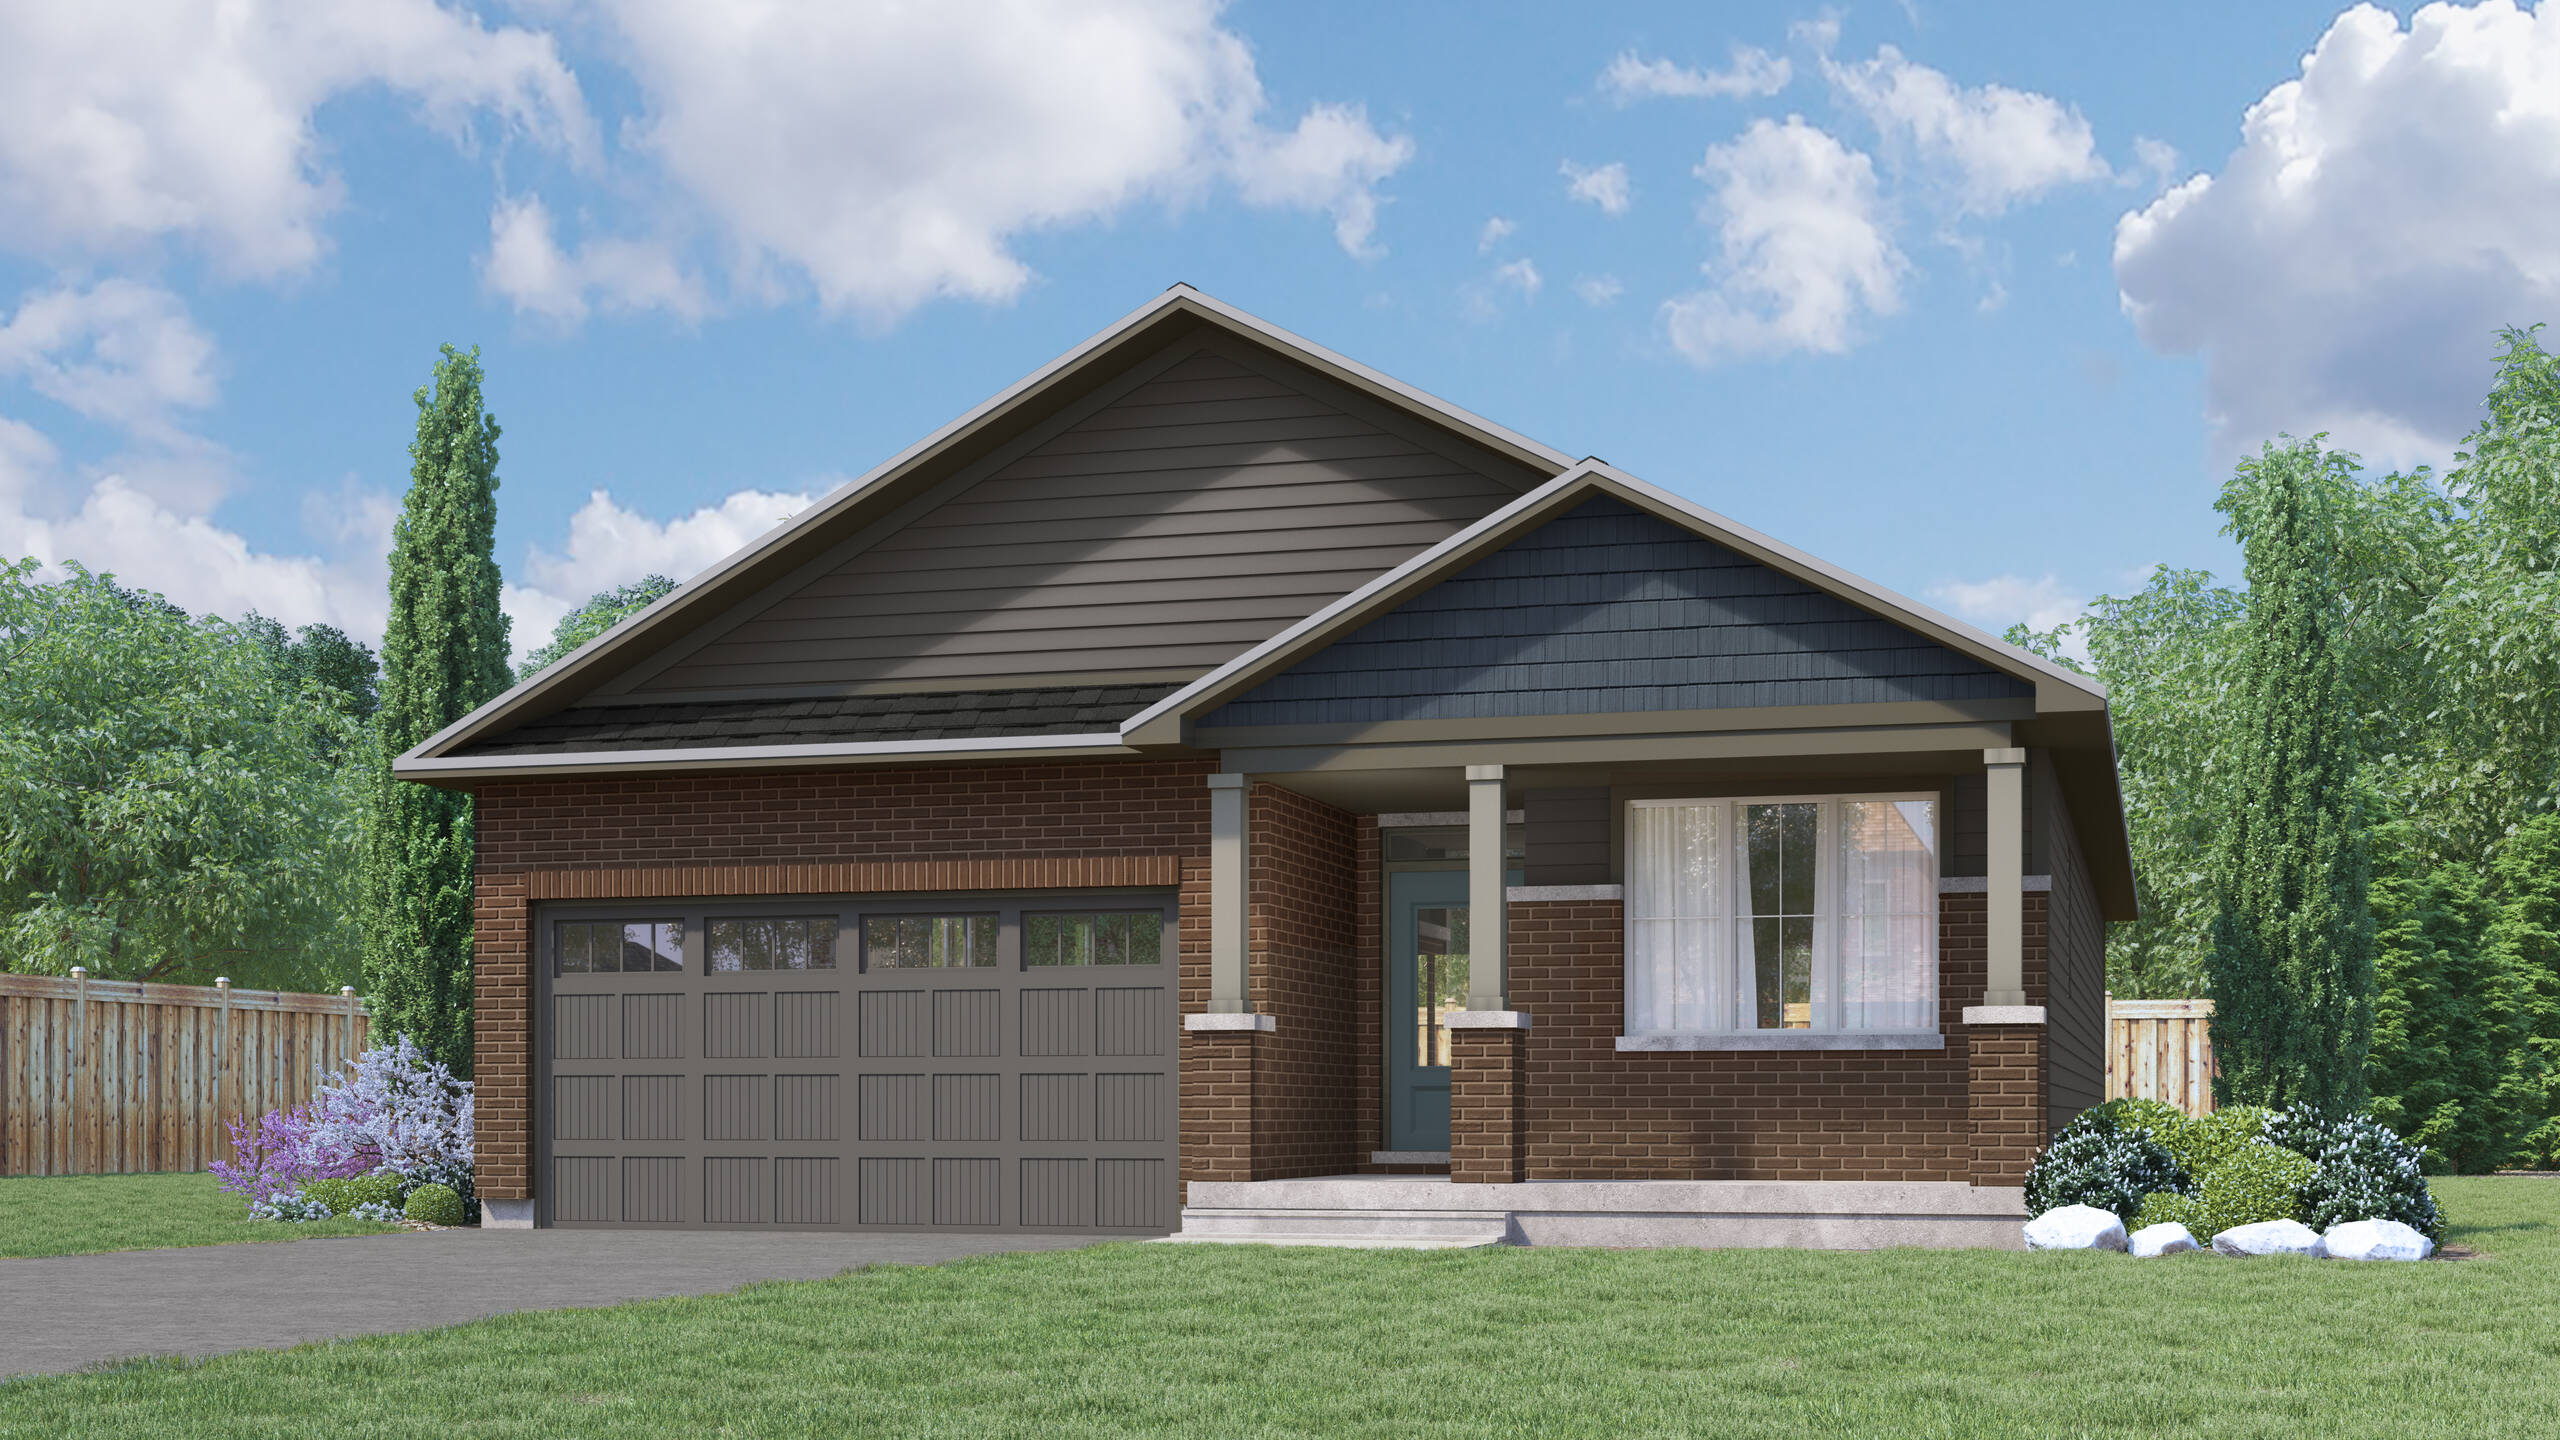 Image of Home Elevation A - Maple